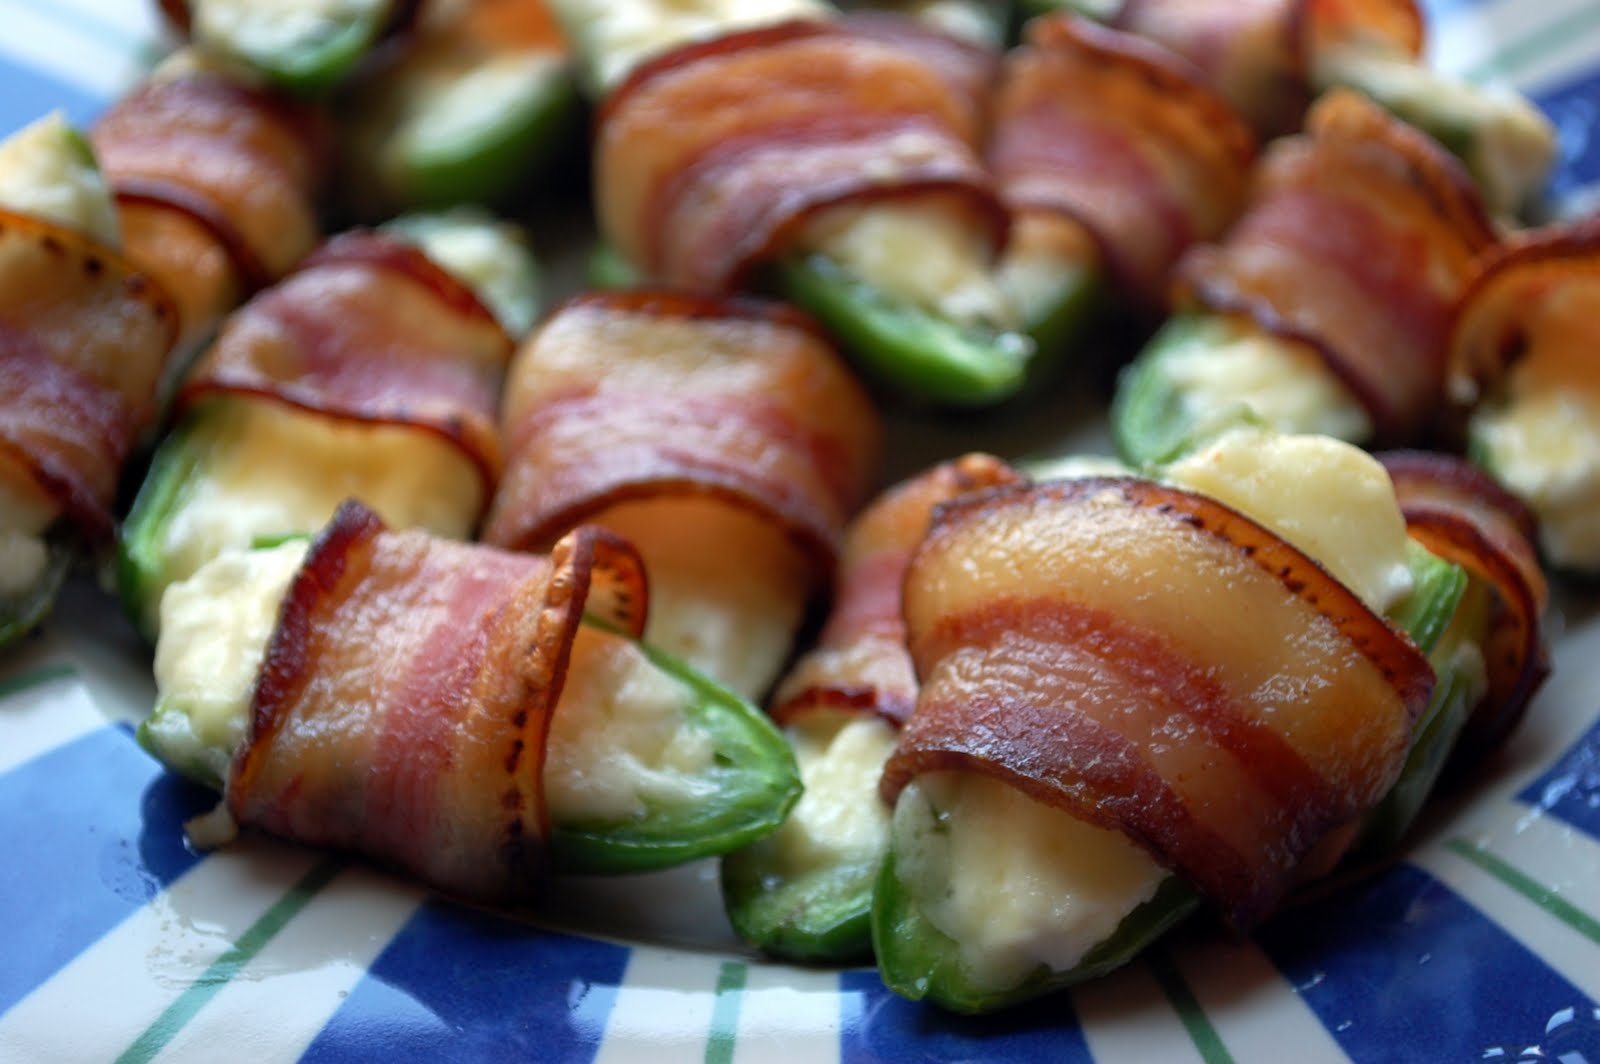 The Skillet Takes: Bacon-Wrapped Stuffed Jalapenos